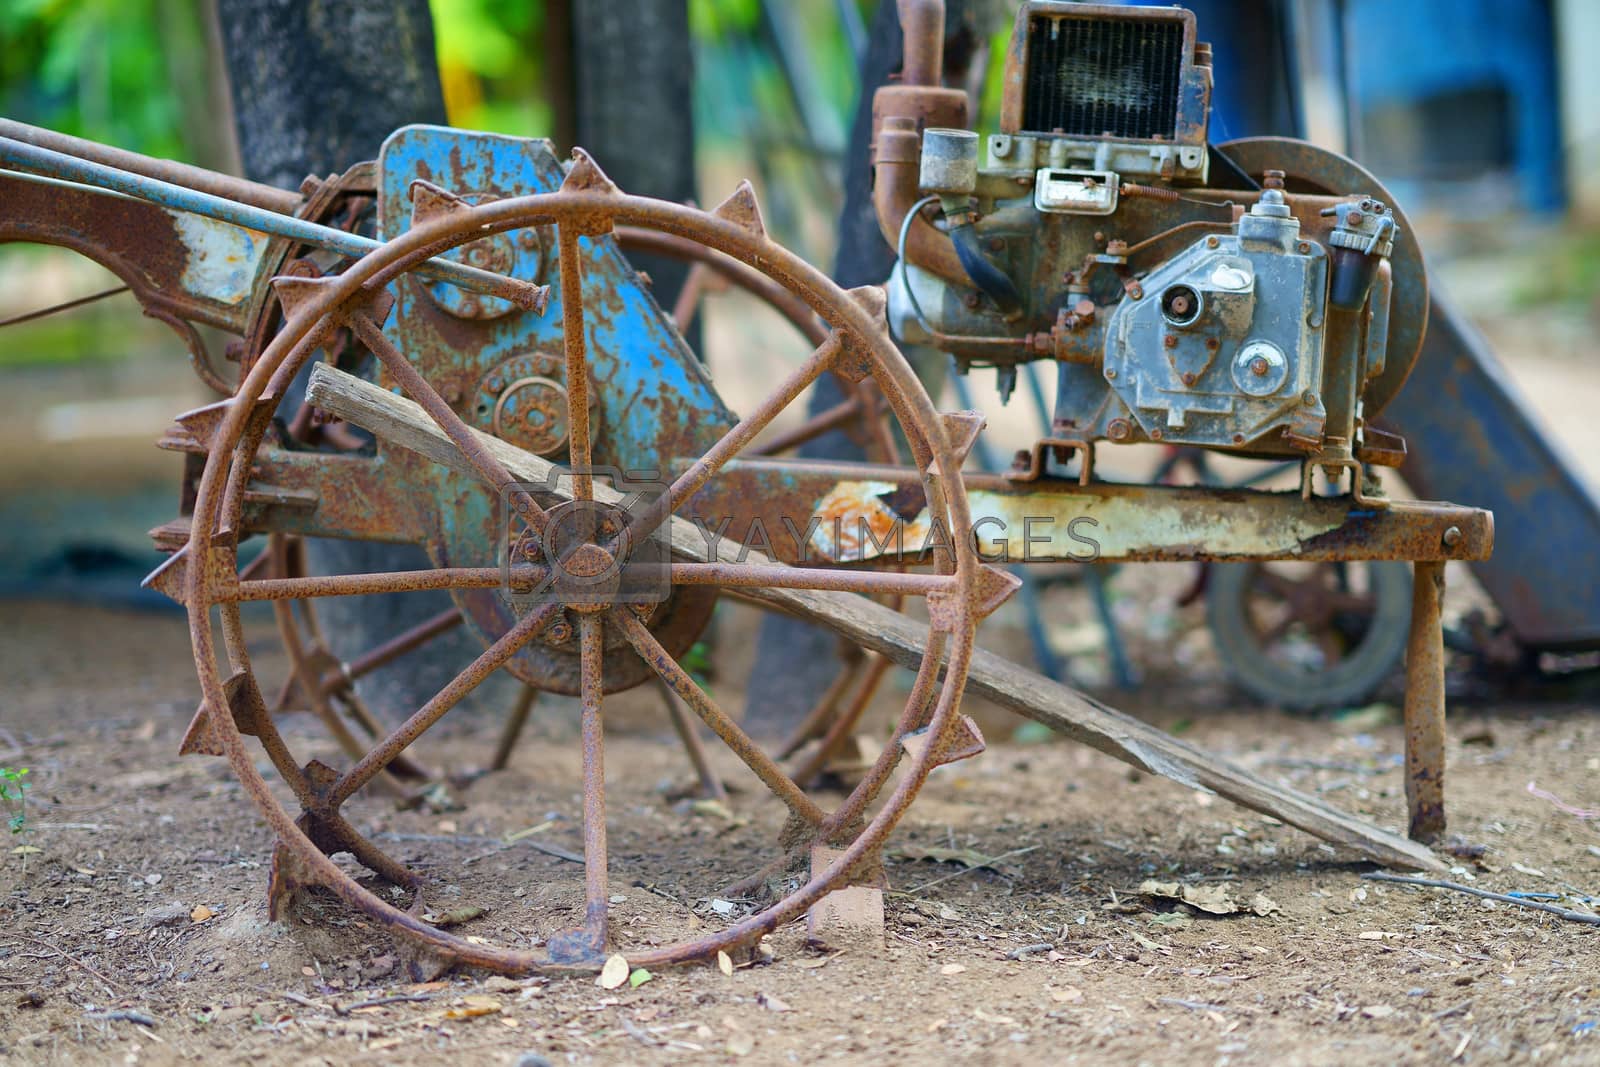 Royalty free image of old tractor for plow farm preparation by VacharapongW